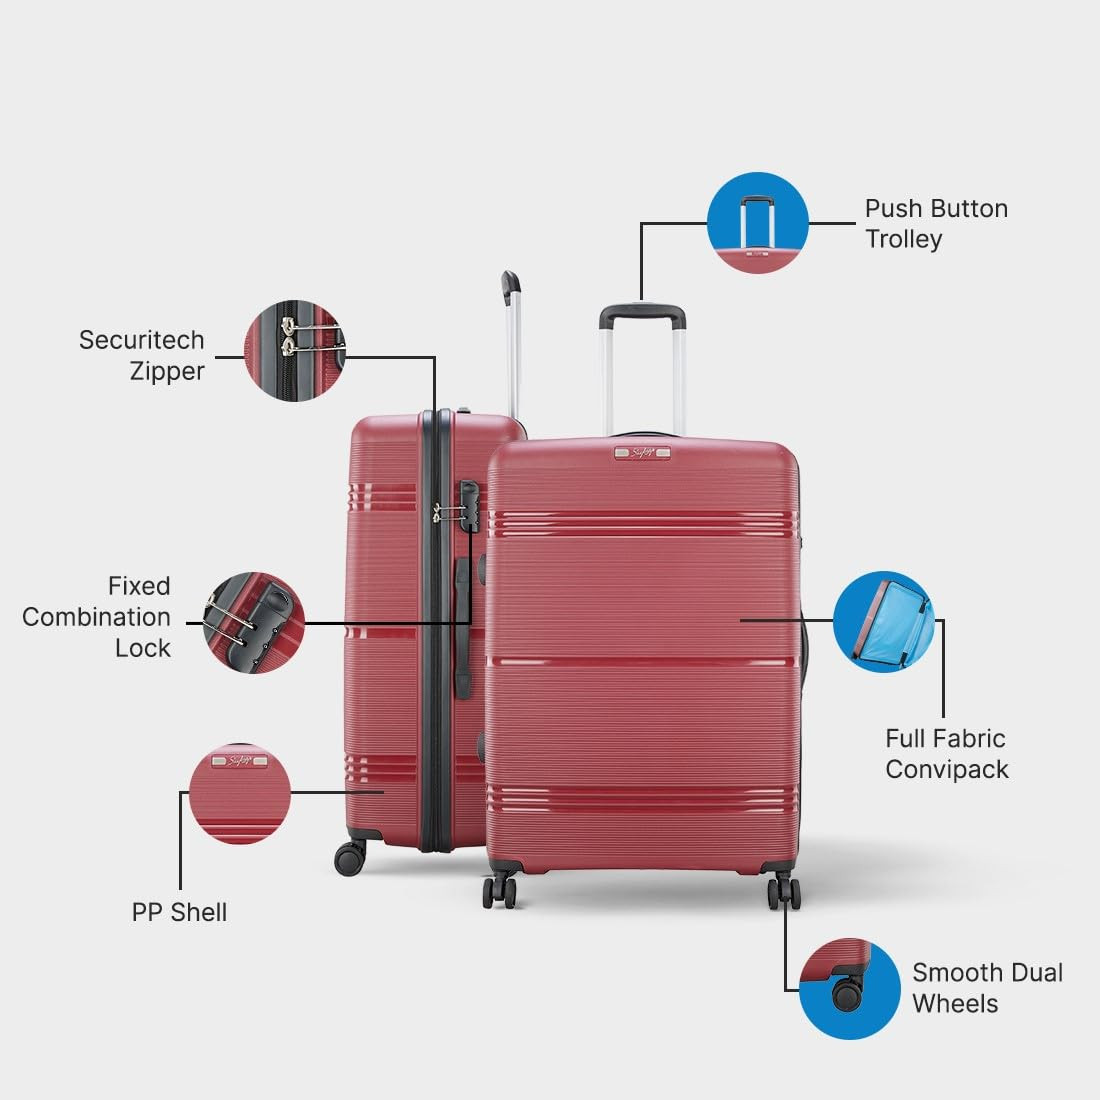 Skybags Focus 8WN Strolly Large 360 79 CmTrolley Bag SpeedWheel Suitcase For Travel 8 Wheel Luggage For Men And Women